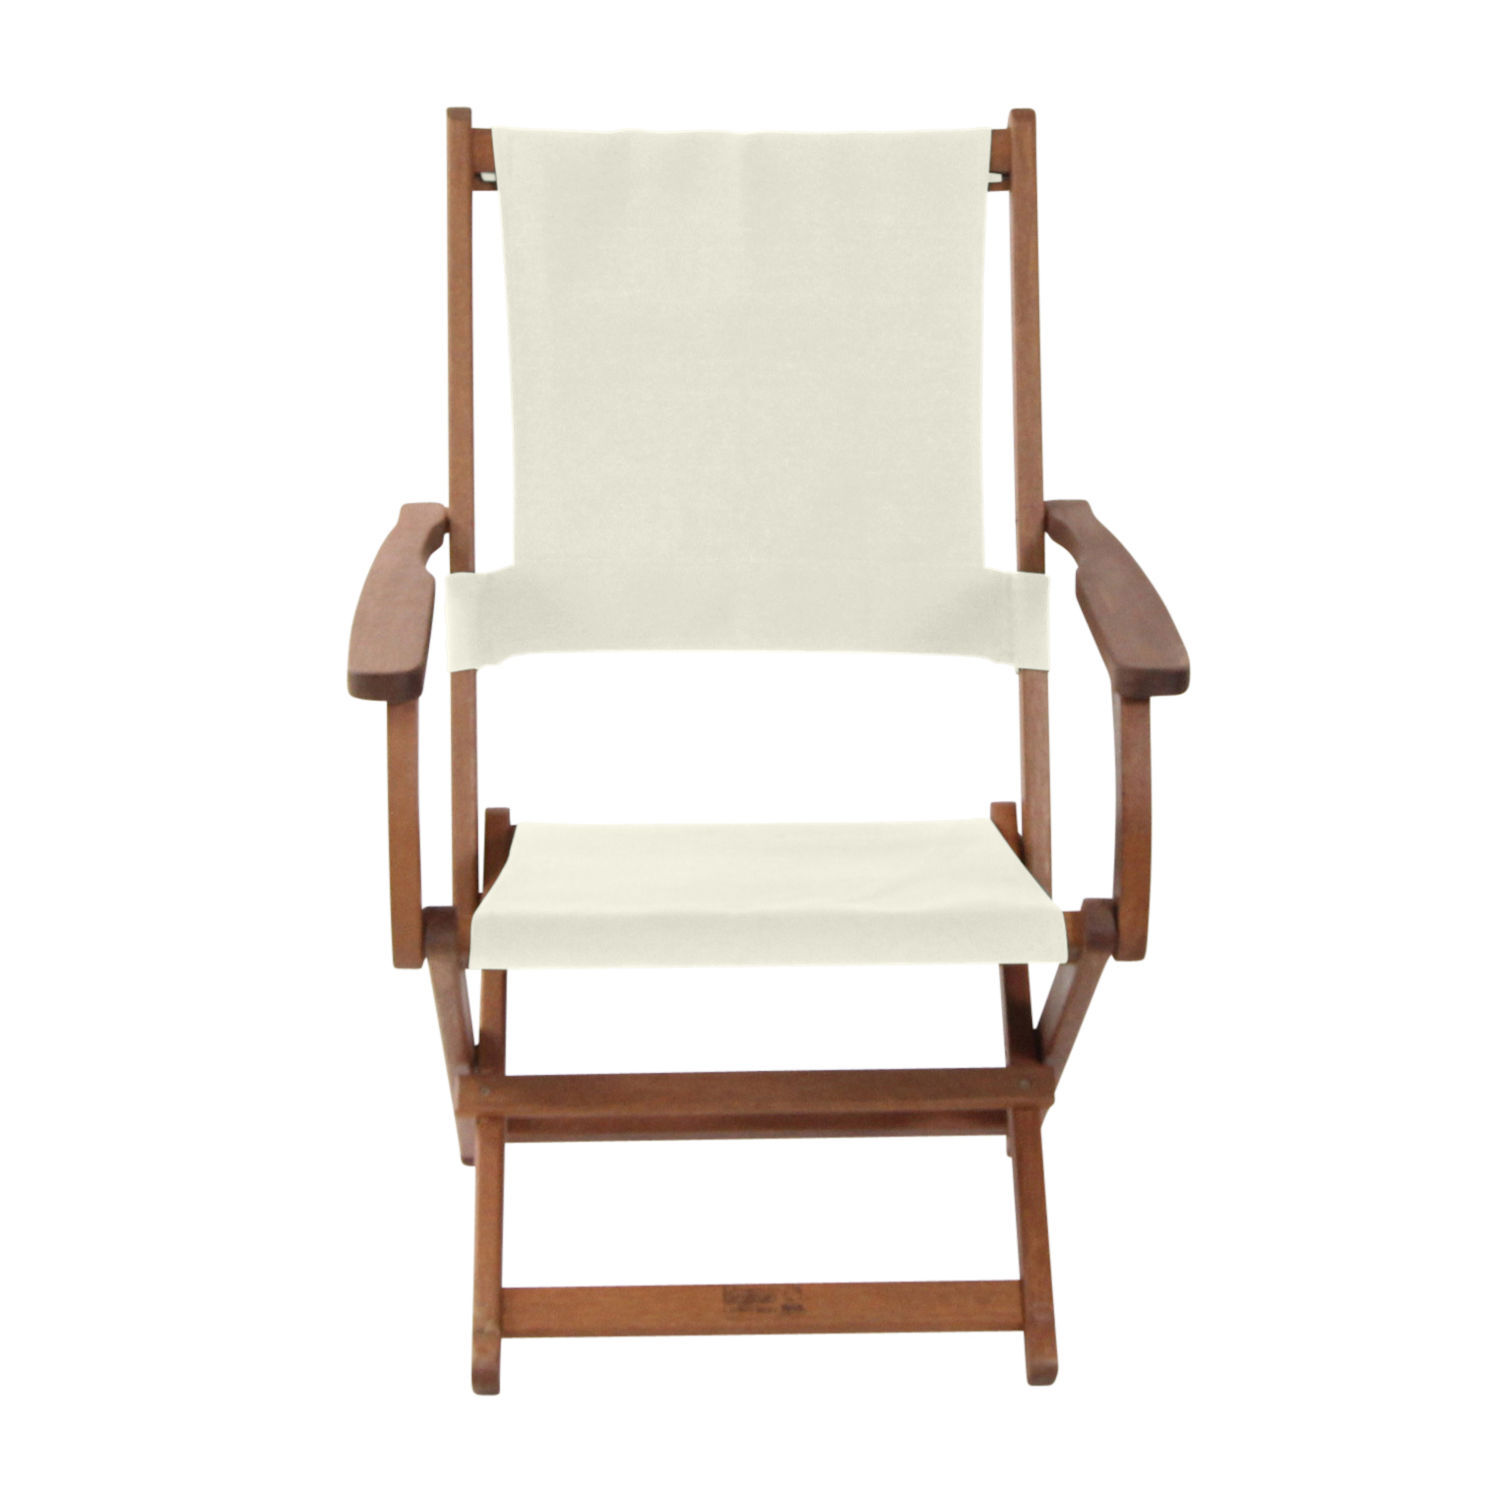 Perfect for Patio/Deck Holds Up to 250 lbs Wood Camp Chair Green Single Pangean Joseph Byer Chair Deck Chair 36 H x 24 W x 25 D Hardwood Patio Chair Wood Folding Chairs BYER OF MAINE 